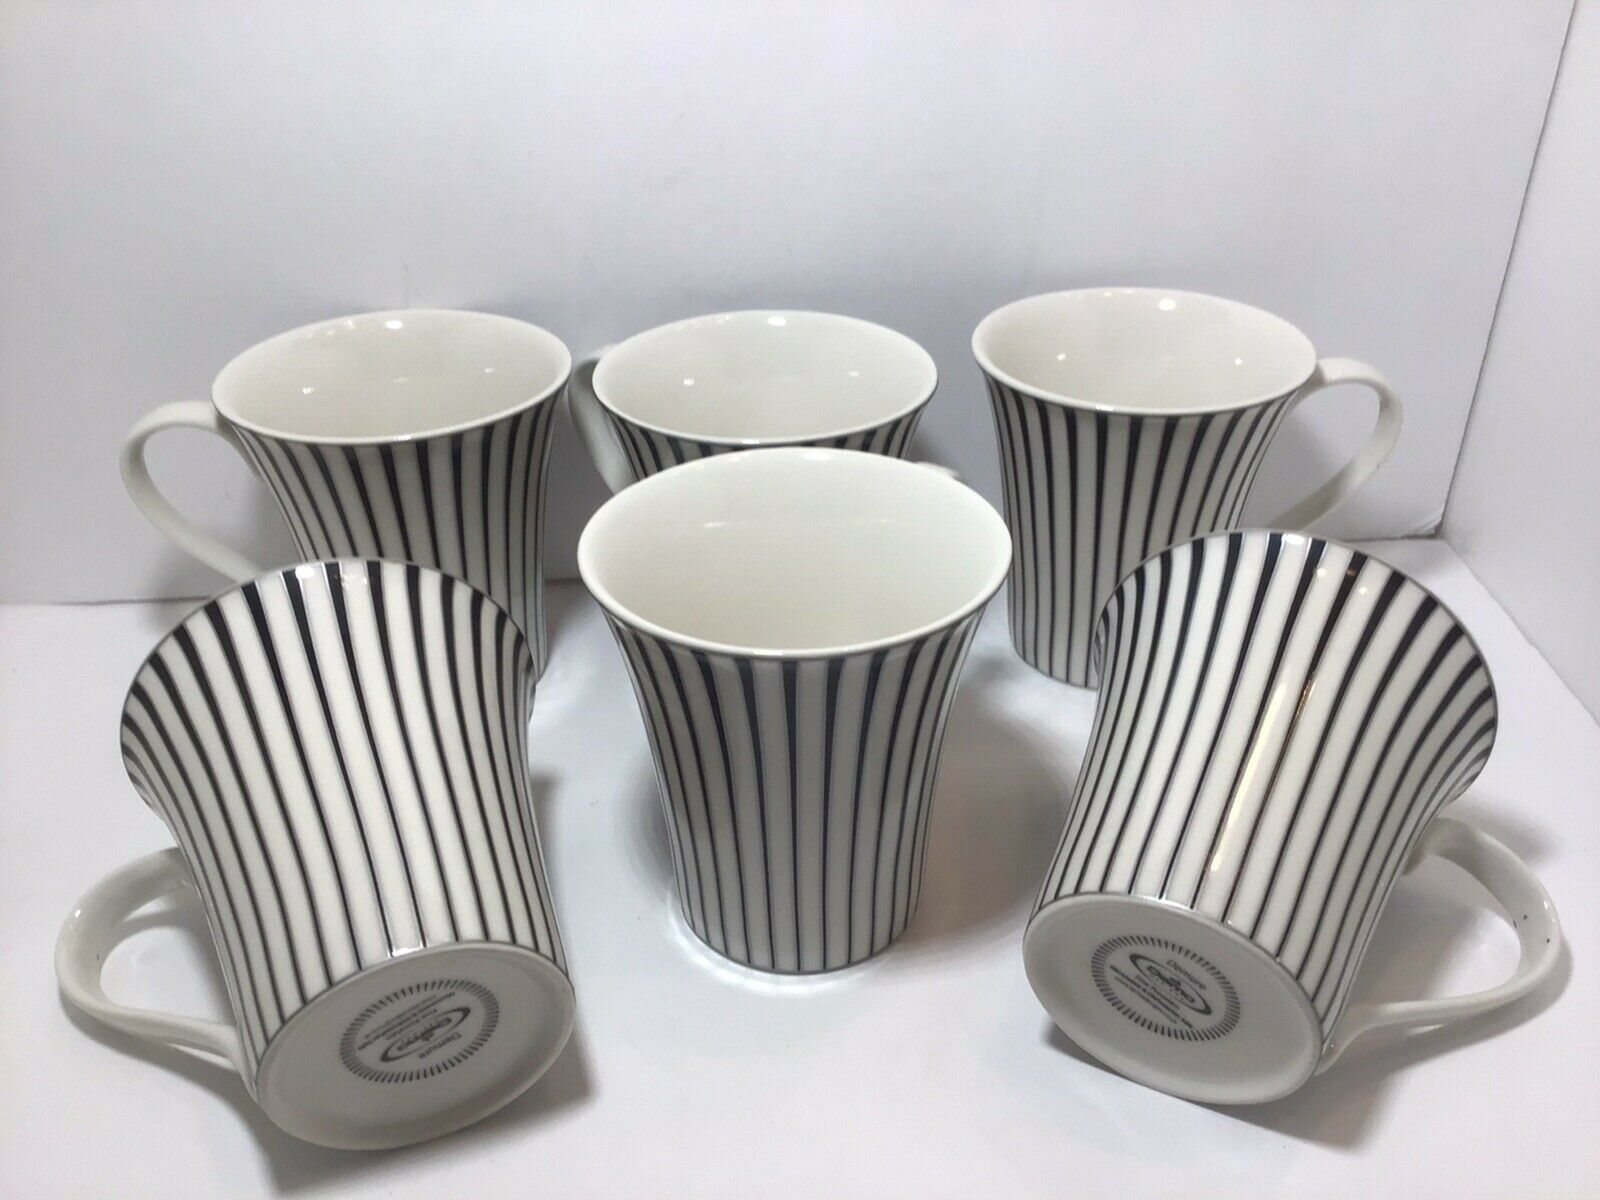 Six Porcelain Coffee Cups, Dema Designs , Black, Silver, White, Nice Lines